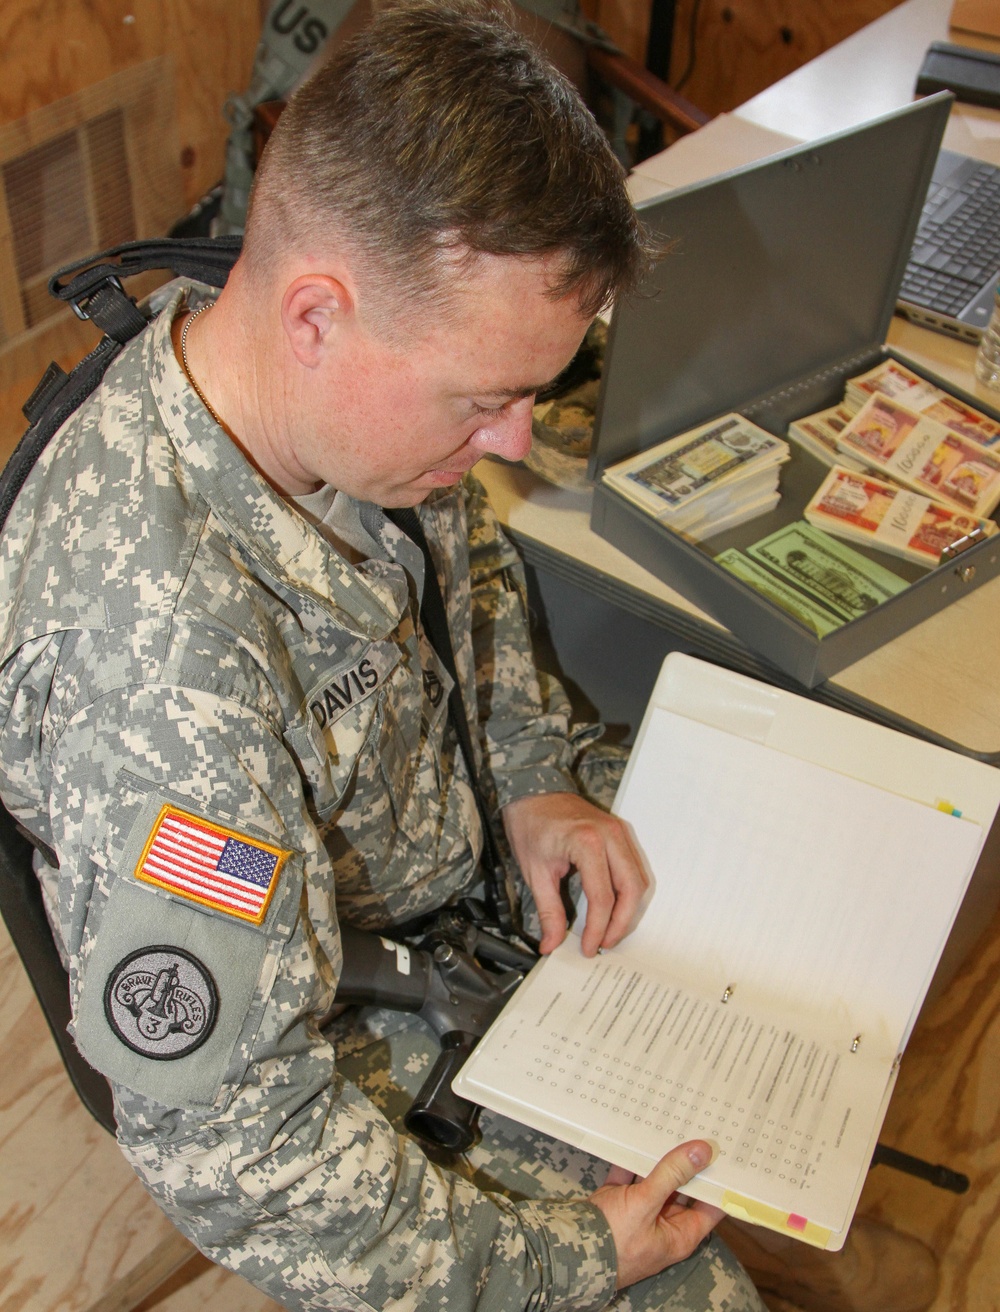 Citizen Soldier cashes in on generous support from employer